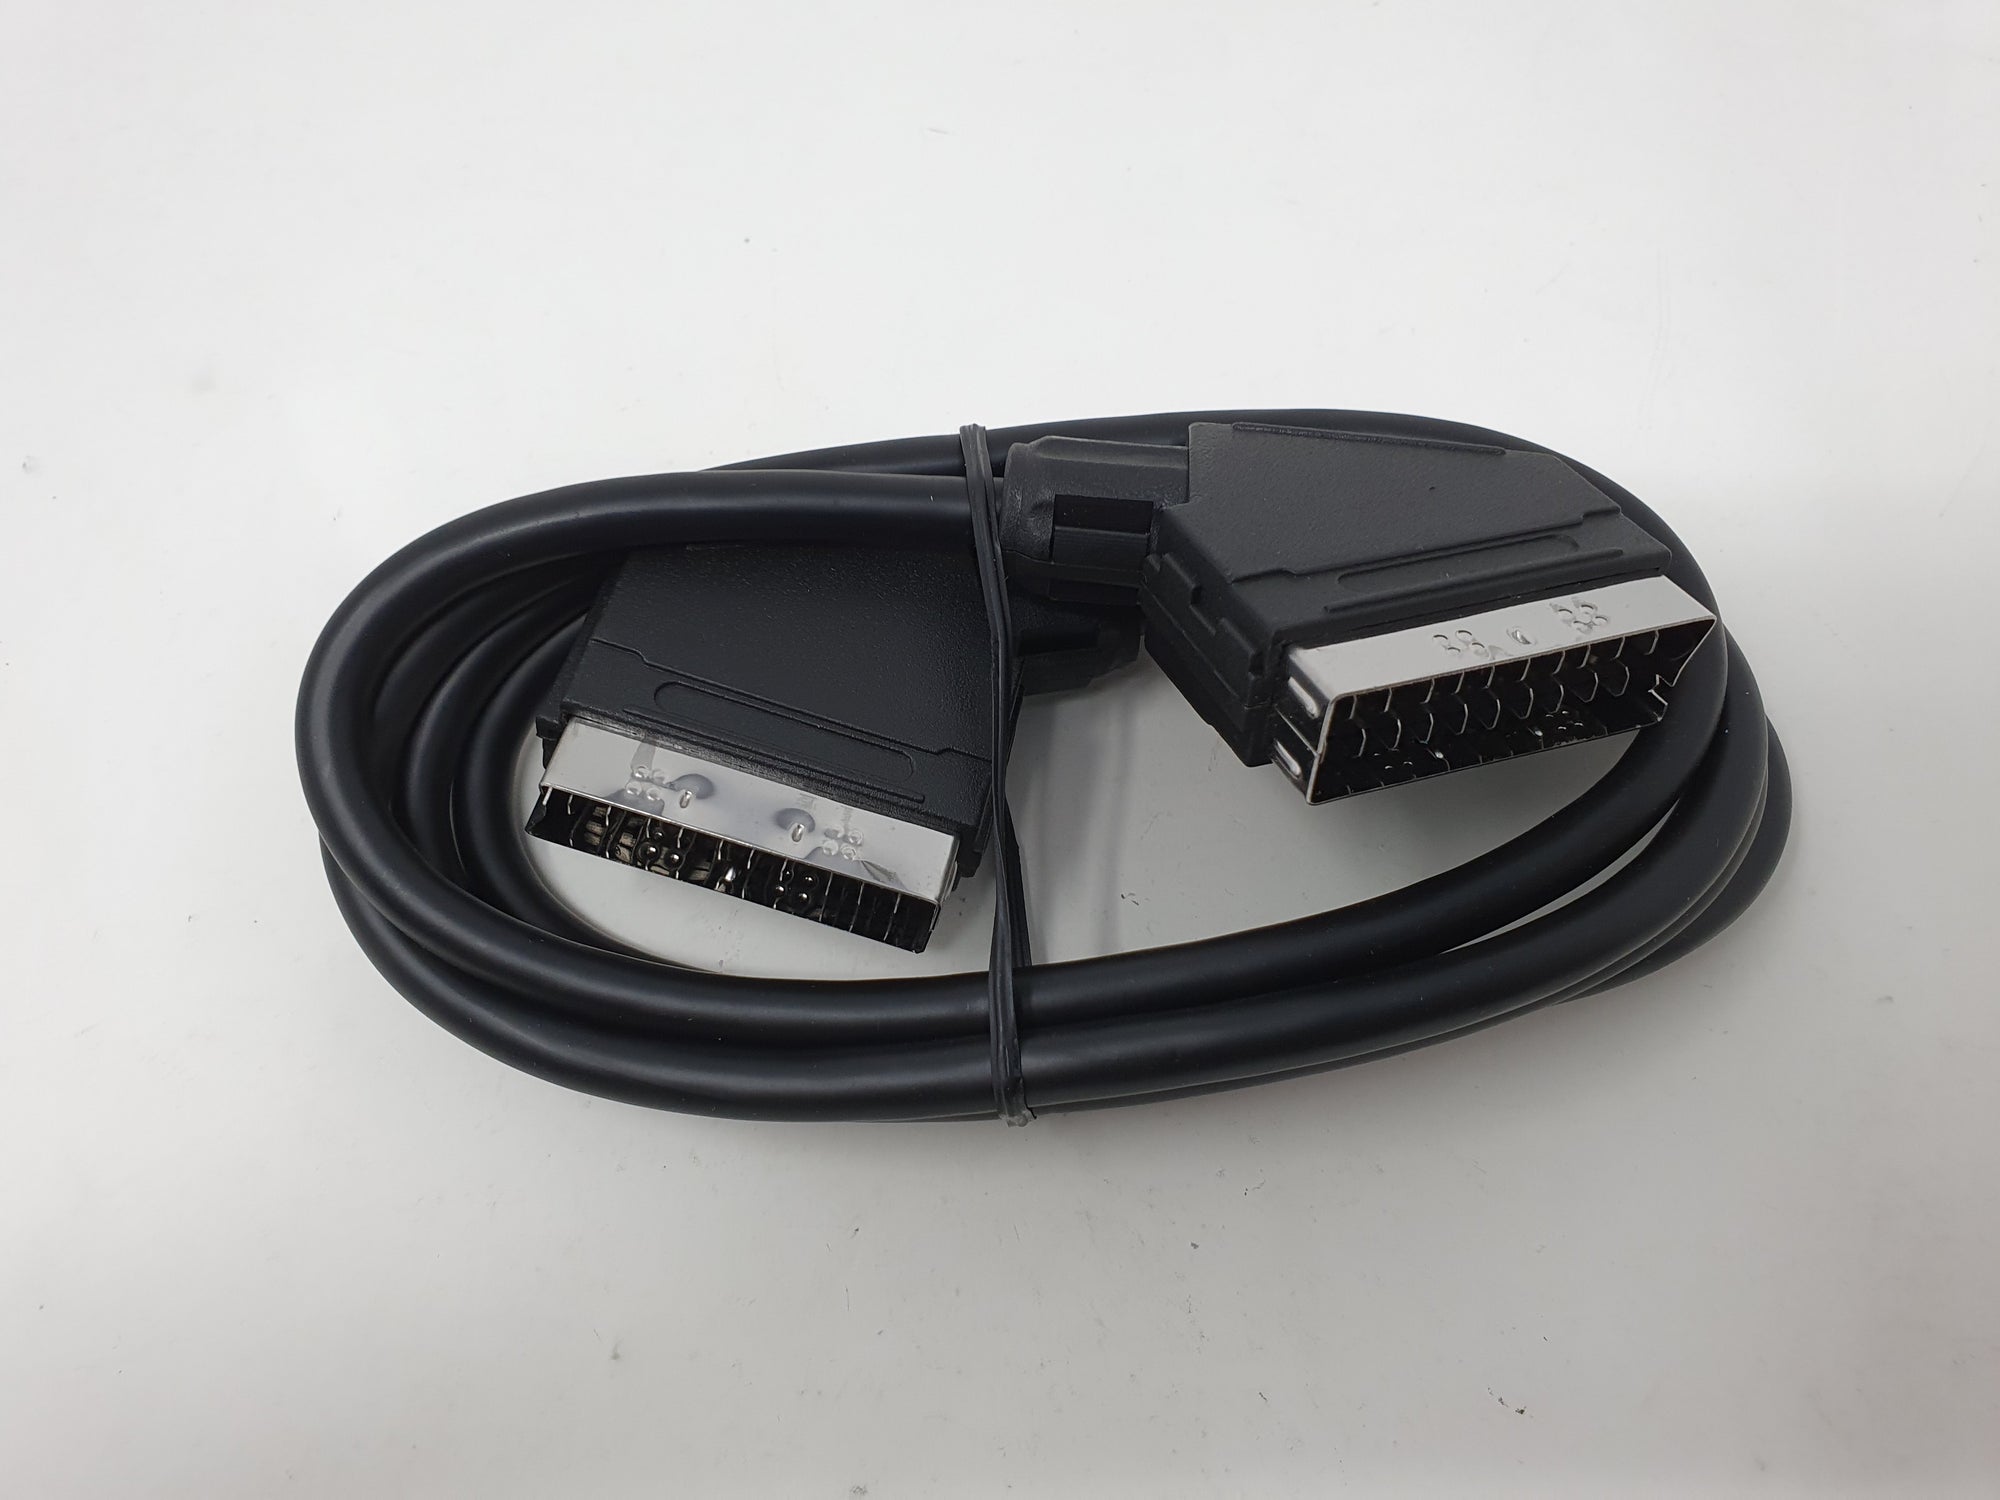 Scart Male to Scart Male Audio Video Cable For TV DVD Set Top Box high Quality 2m